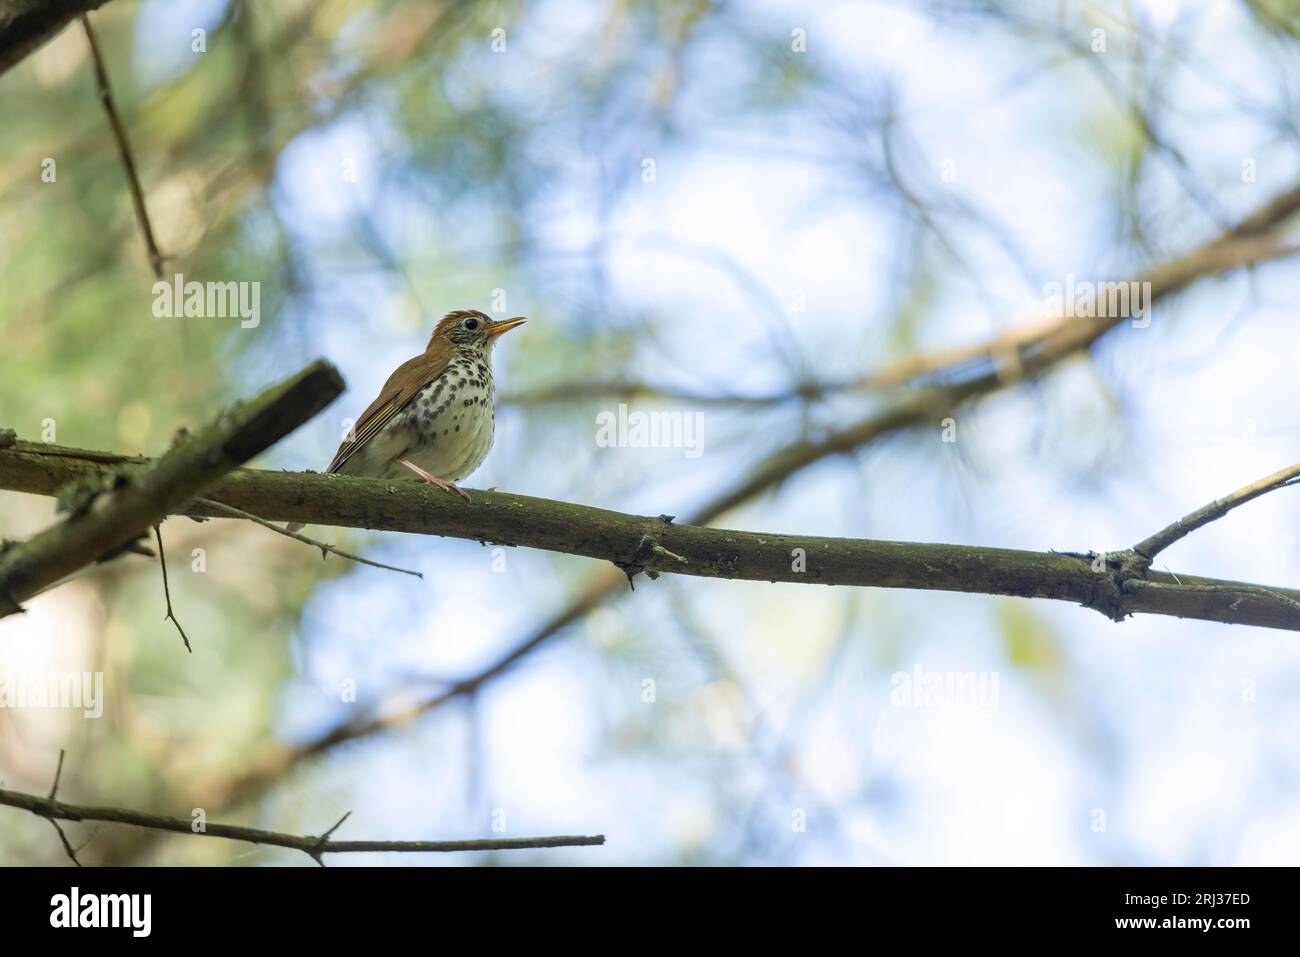 Wood thrush Hylocichla mustelina, adult perched in forest canopy, Belleplain State Forest, New Jersey, USA, May Stock Photo